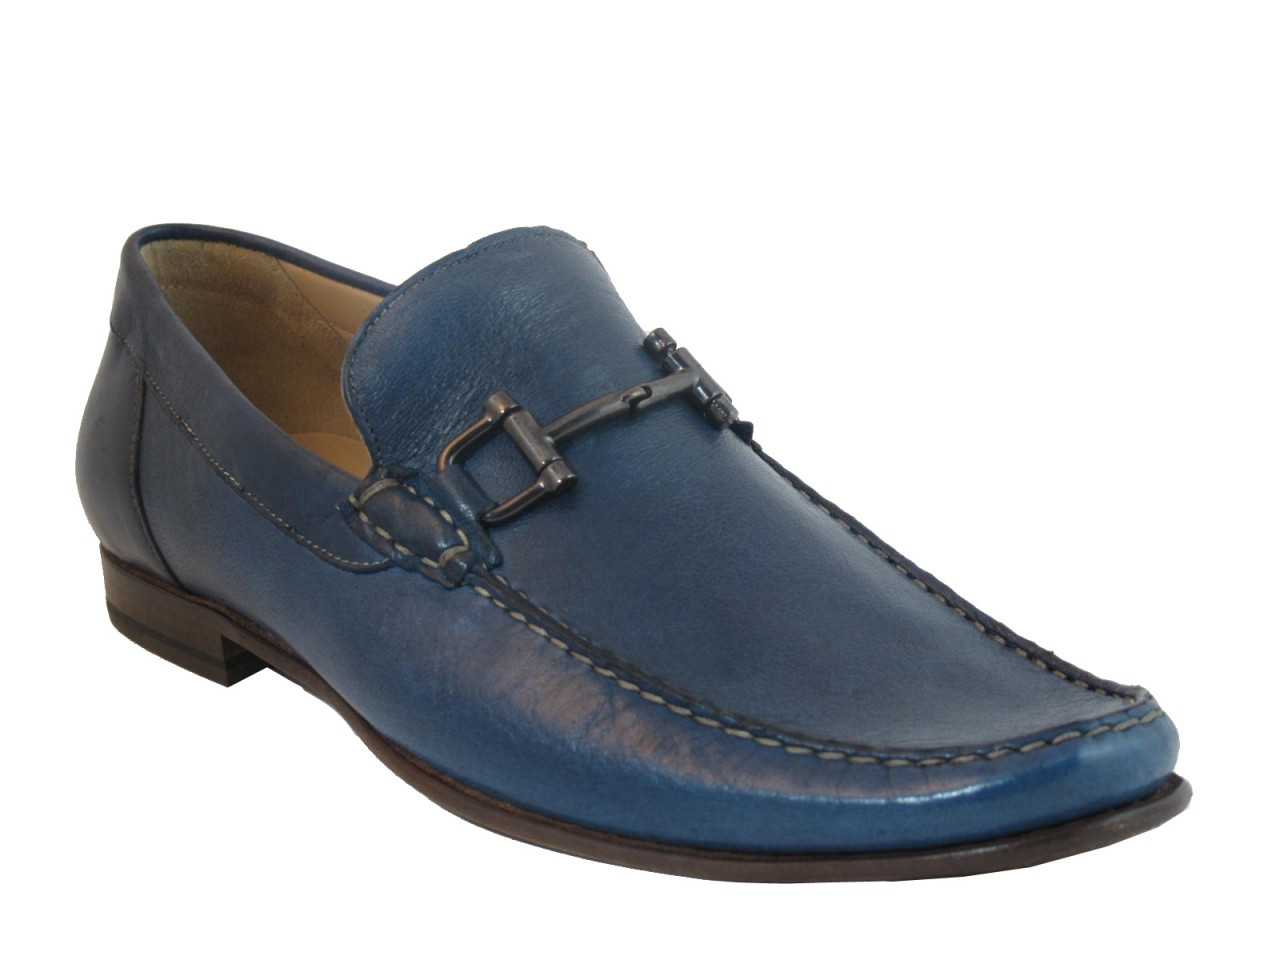 Men's Italian Leather Loafer Shoes 1087 By Boemos ,Available in Blue ...